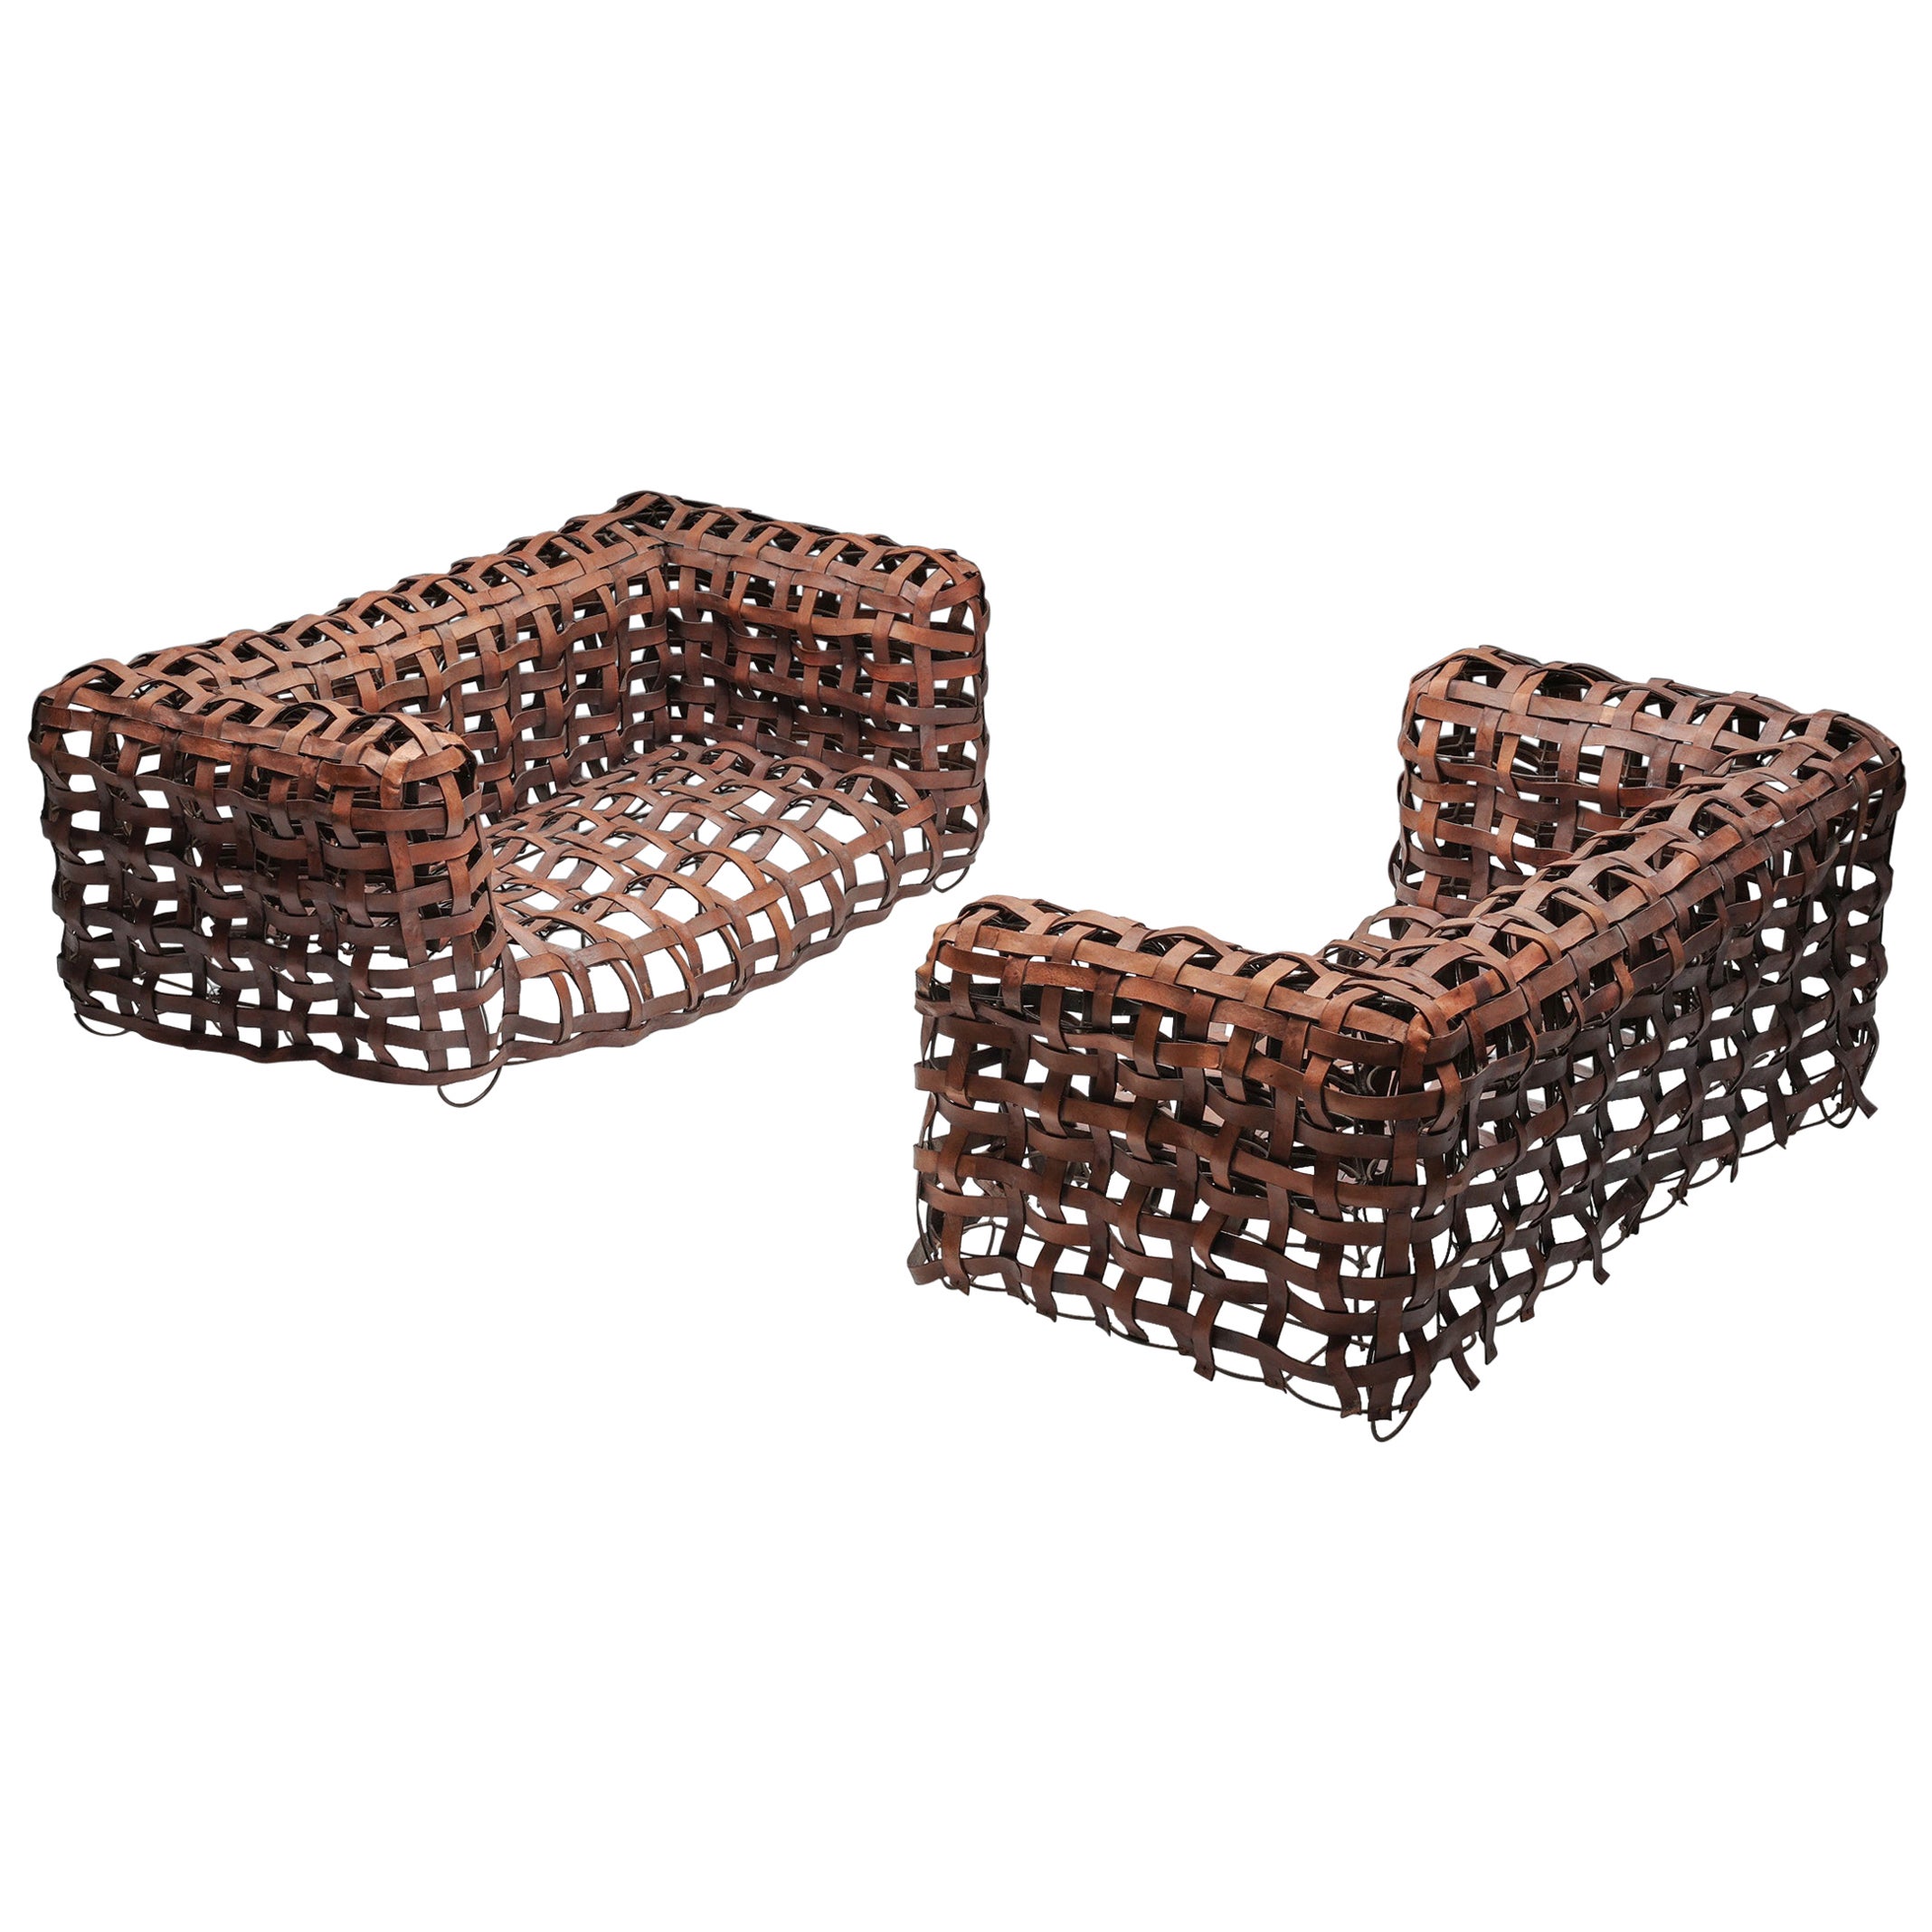 Sculptural Woven Leather Sofa, Metal Frame, UK, 1950s For Sale